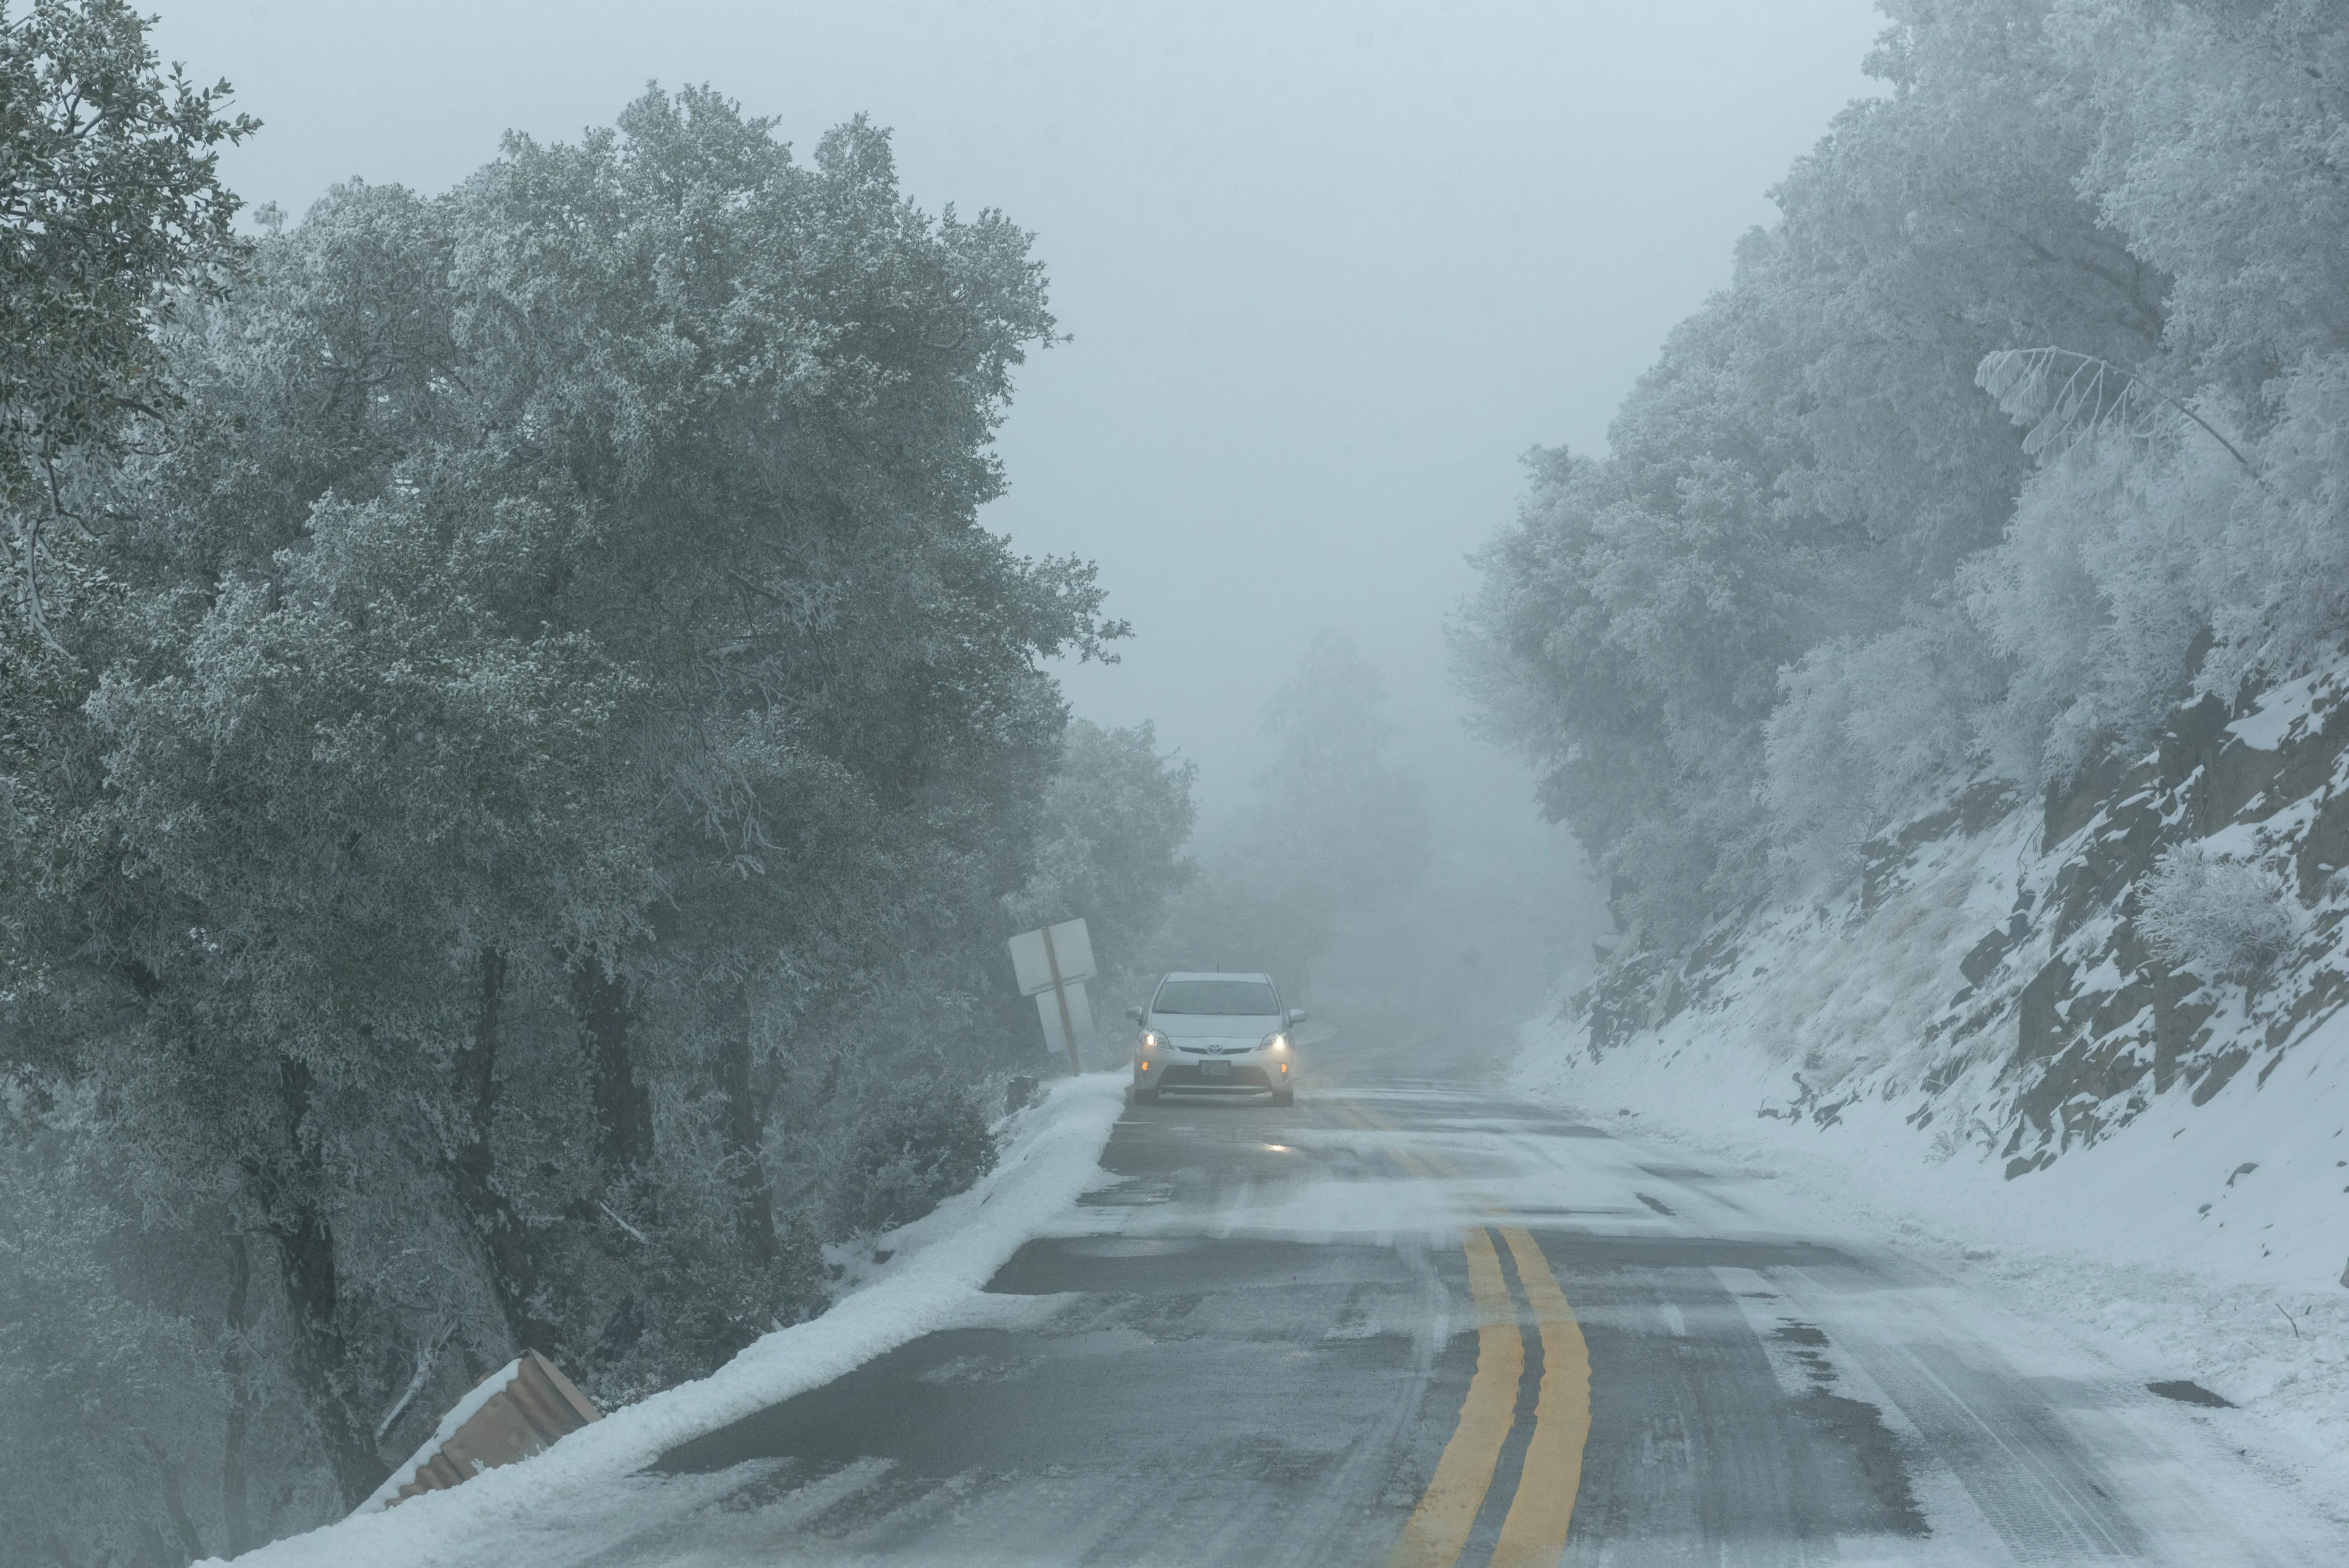 REUTERS: View of an icy road as a massive winter storm passes along the West coast, on Mount Hamilton near San Jose, California, U.S., February 23, 2023. REUTERS/Laure Andrillon